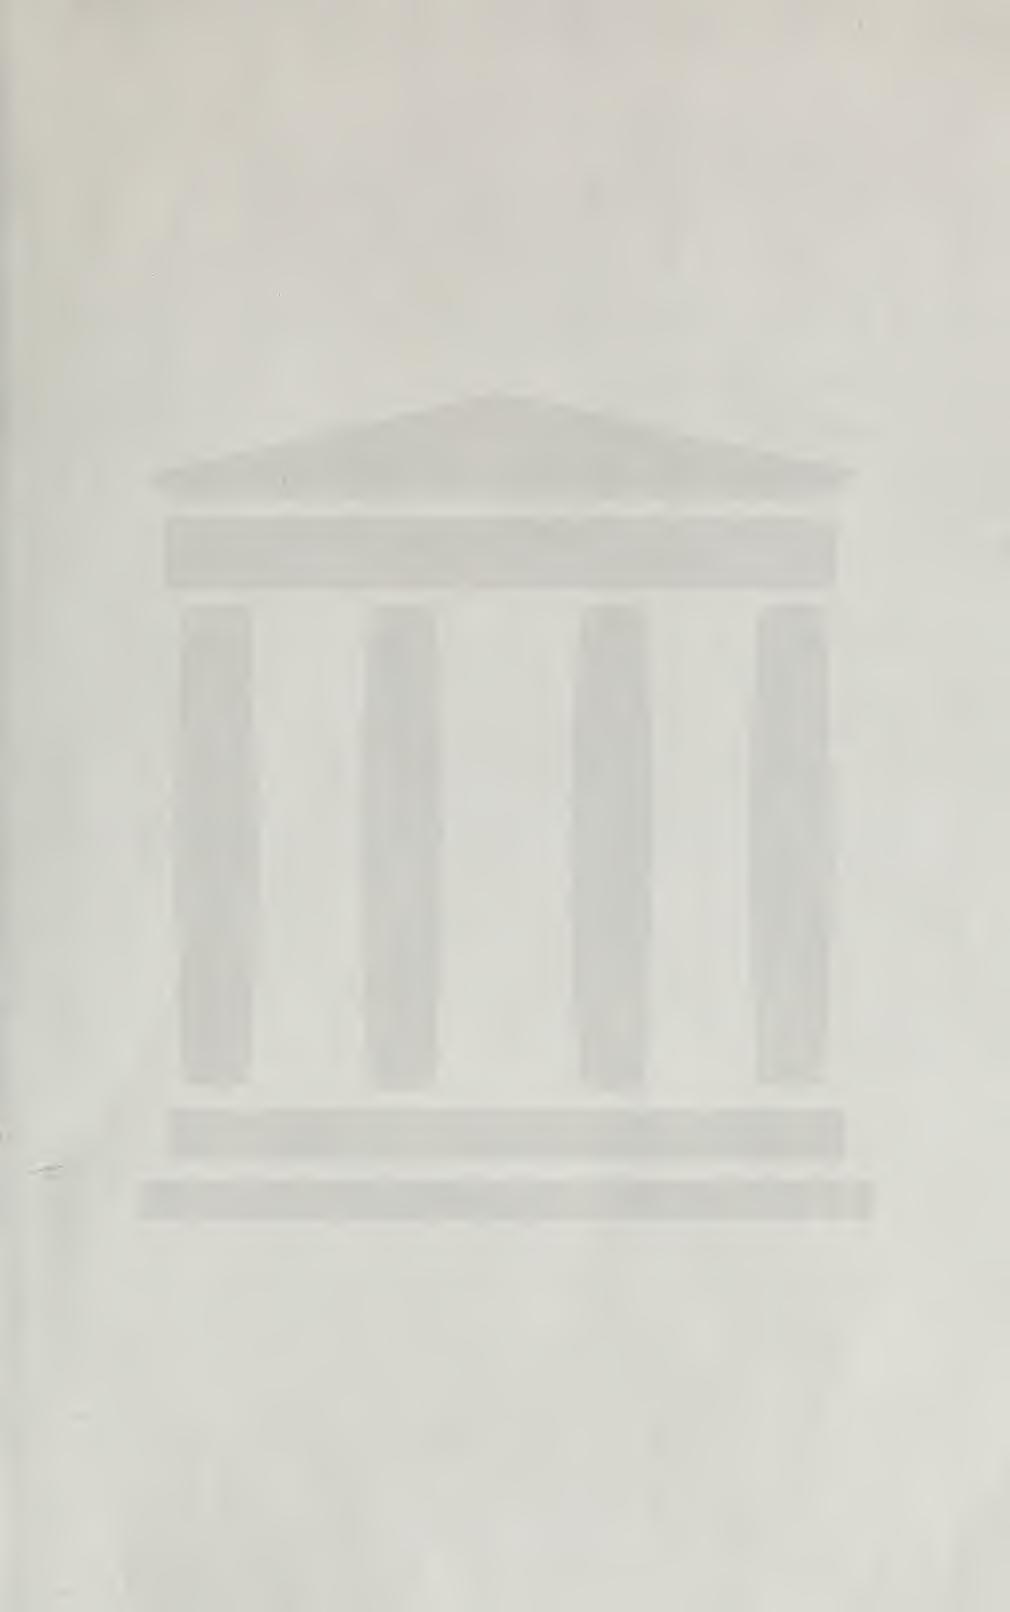 Digitized by the Internet Archive in 2012 with